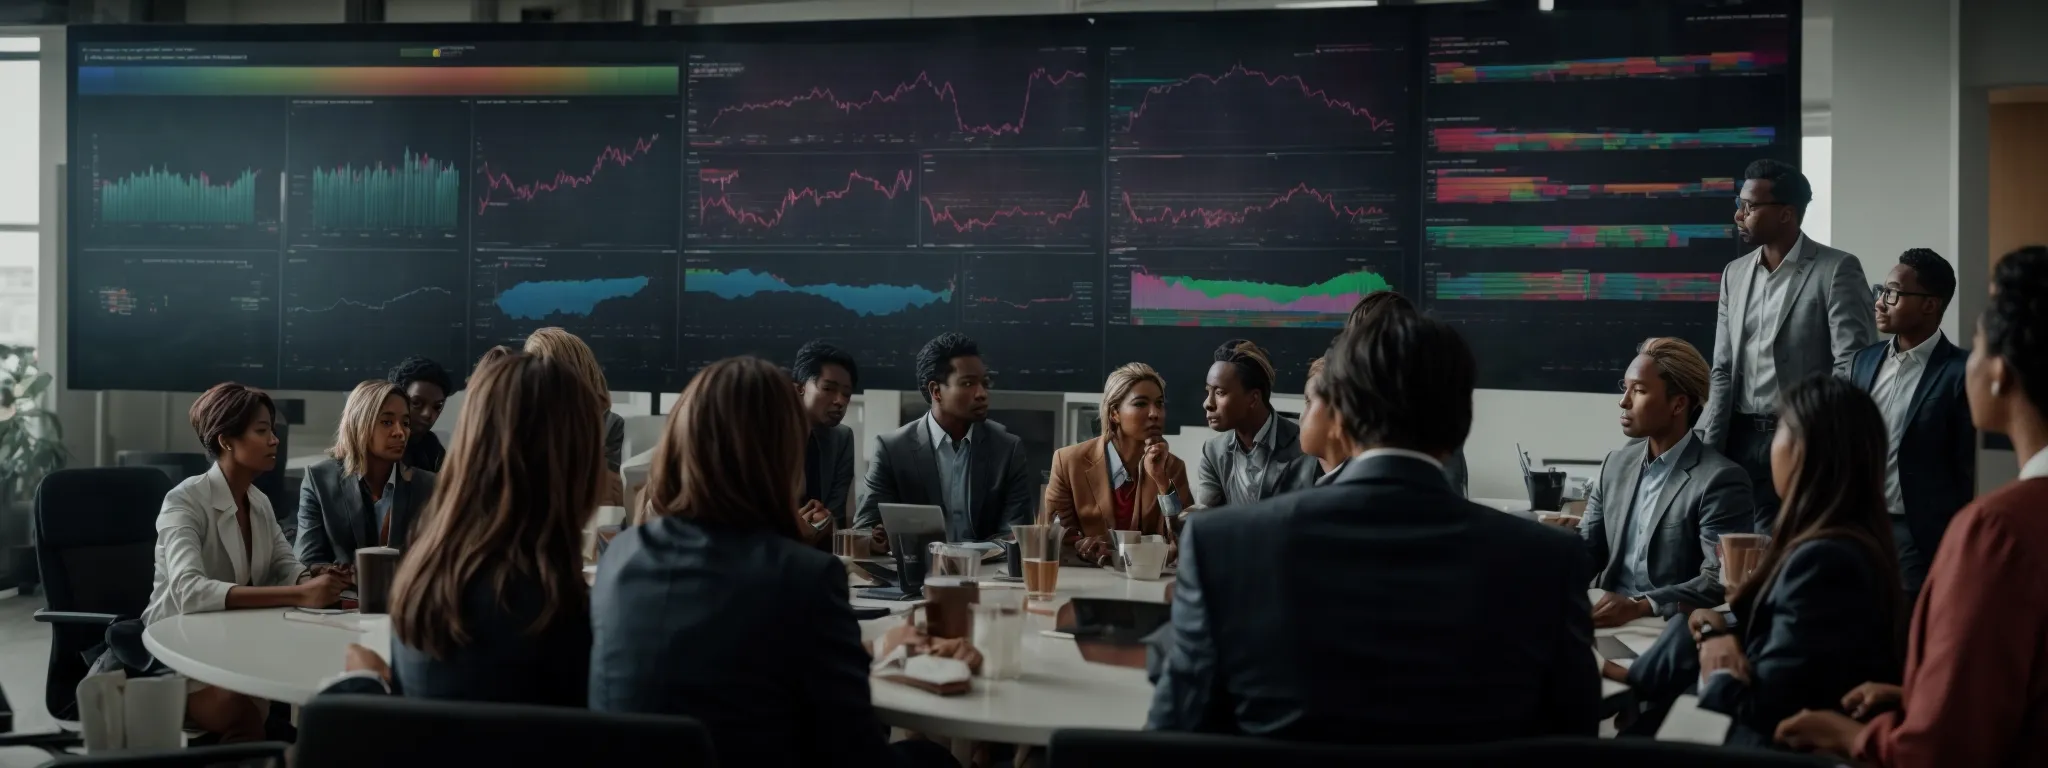 a diverse group of professionals gathered around a large screen displaying colorful charts and project timelines, actively engaged in discussion.